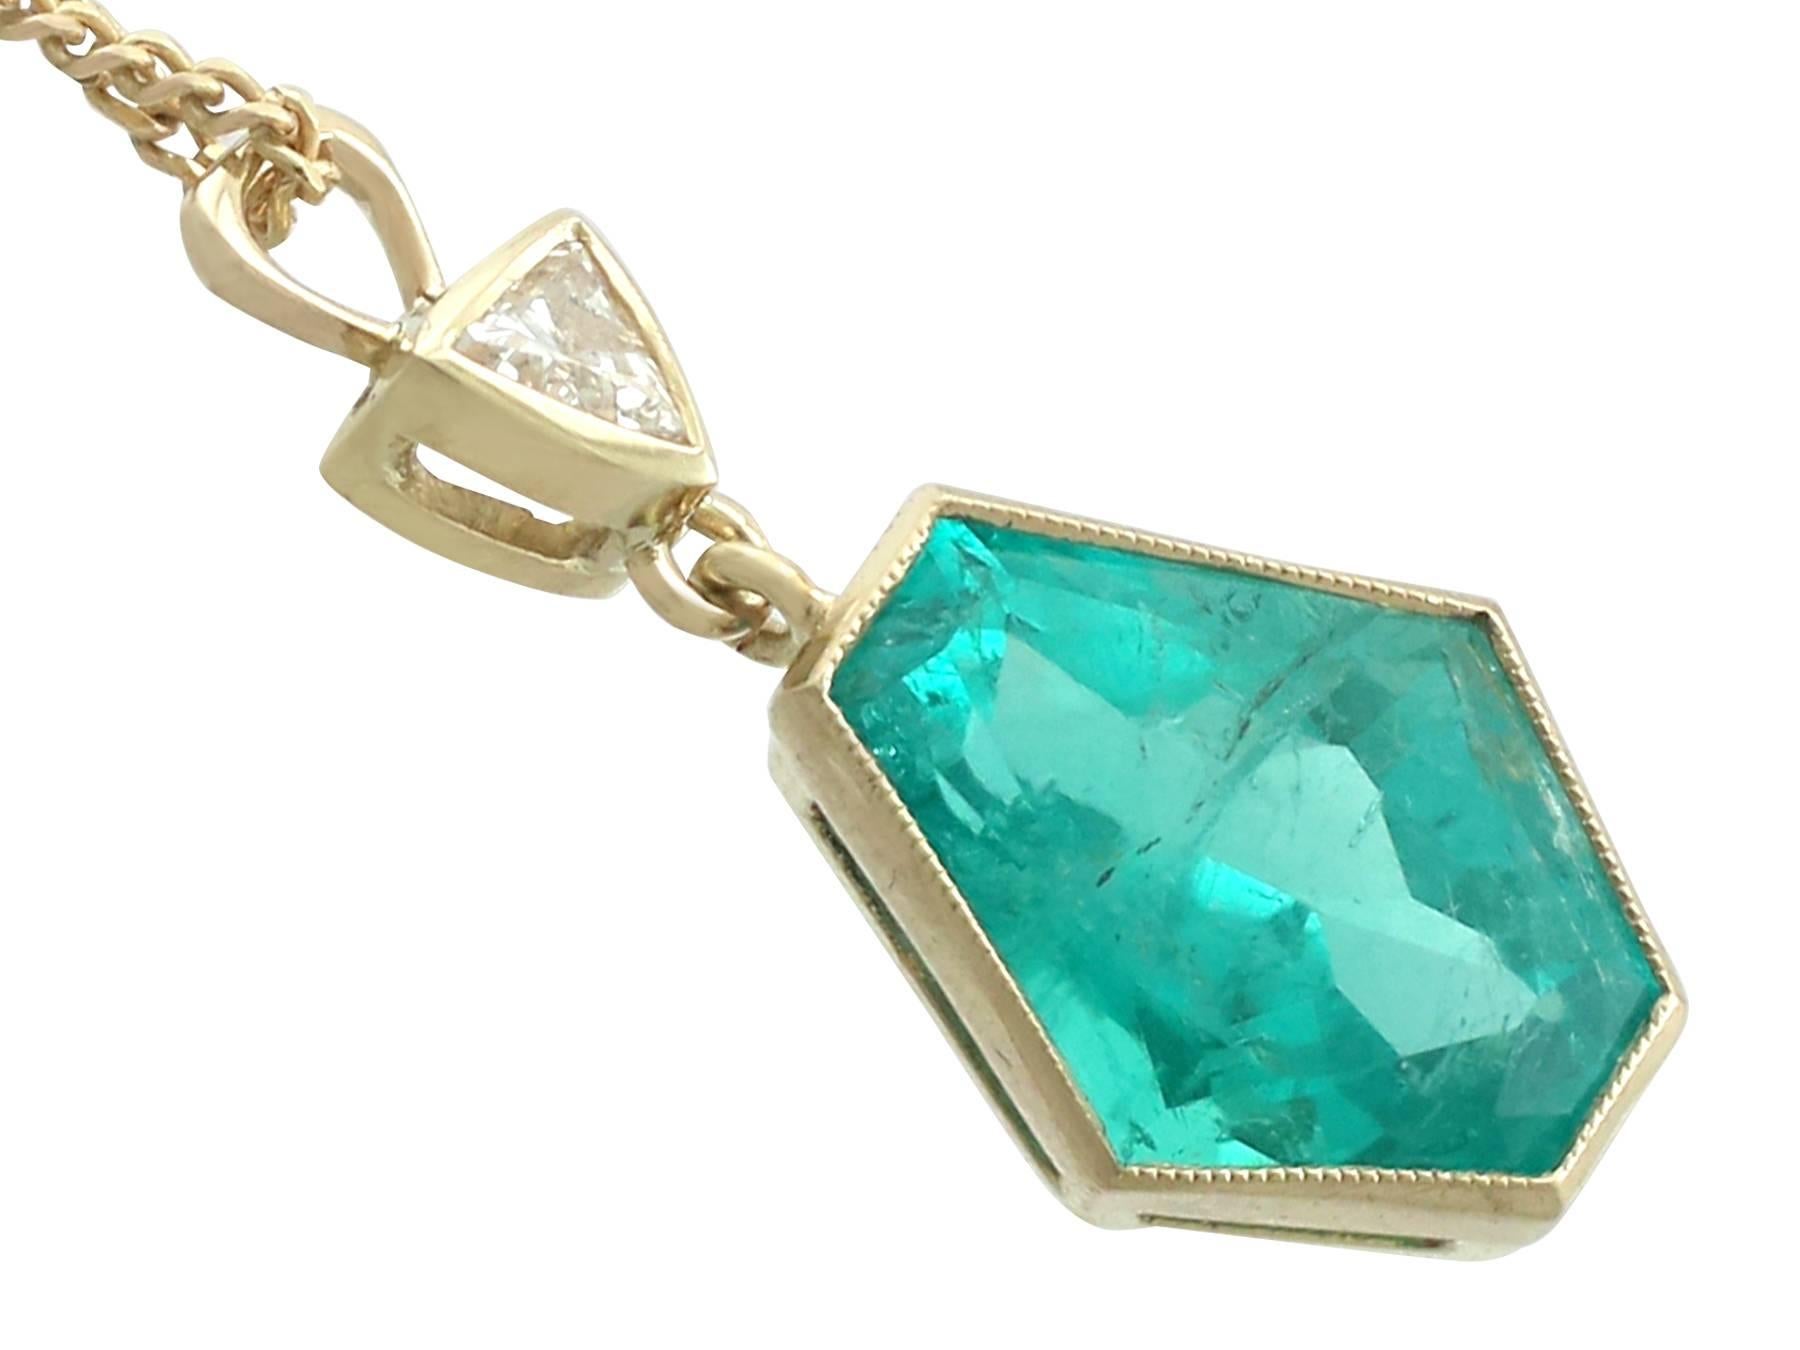 A stunning vintage 4.50 carat emerald and 0.22 carat diamond, 18k yellow gold pendant; part of our diverse gemstone jewelry and estate jewelry collections.

This stunning, fine and impressive emerald pendant has been crafted in 18k yellow gold.

The